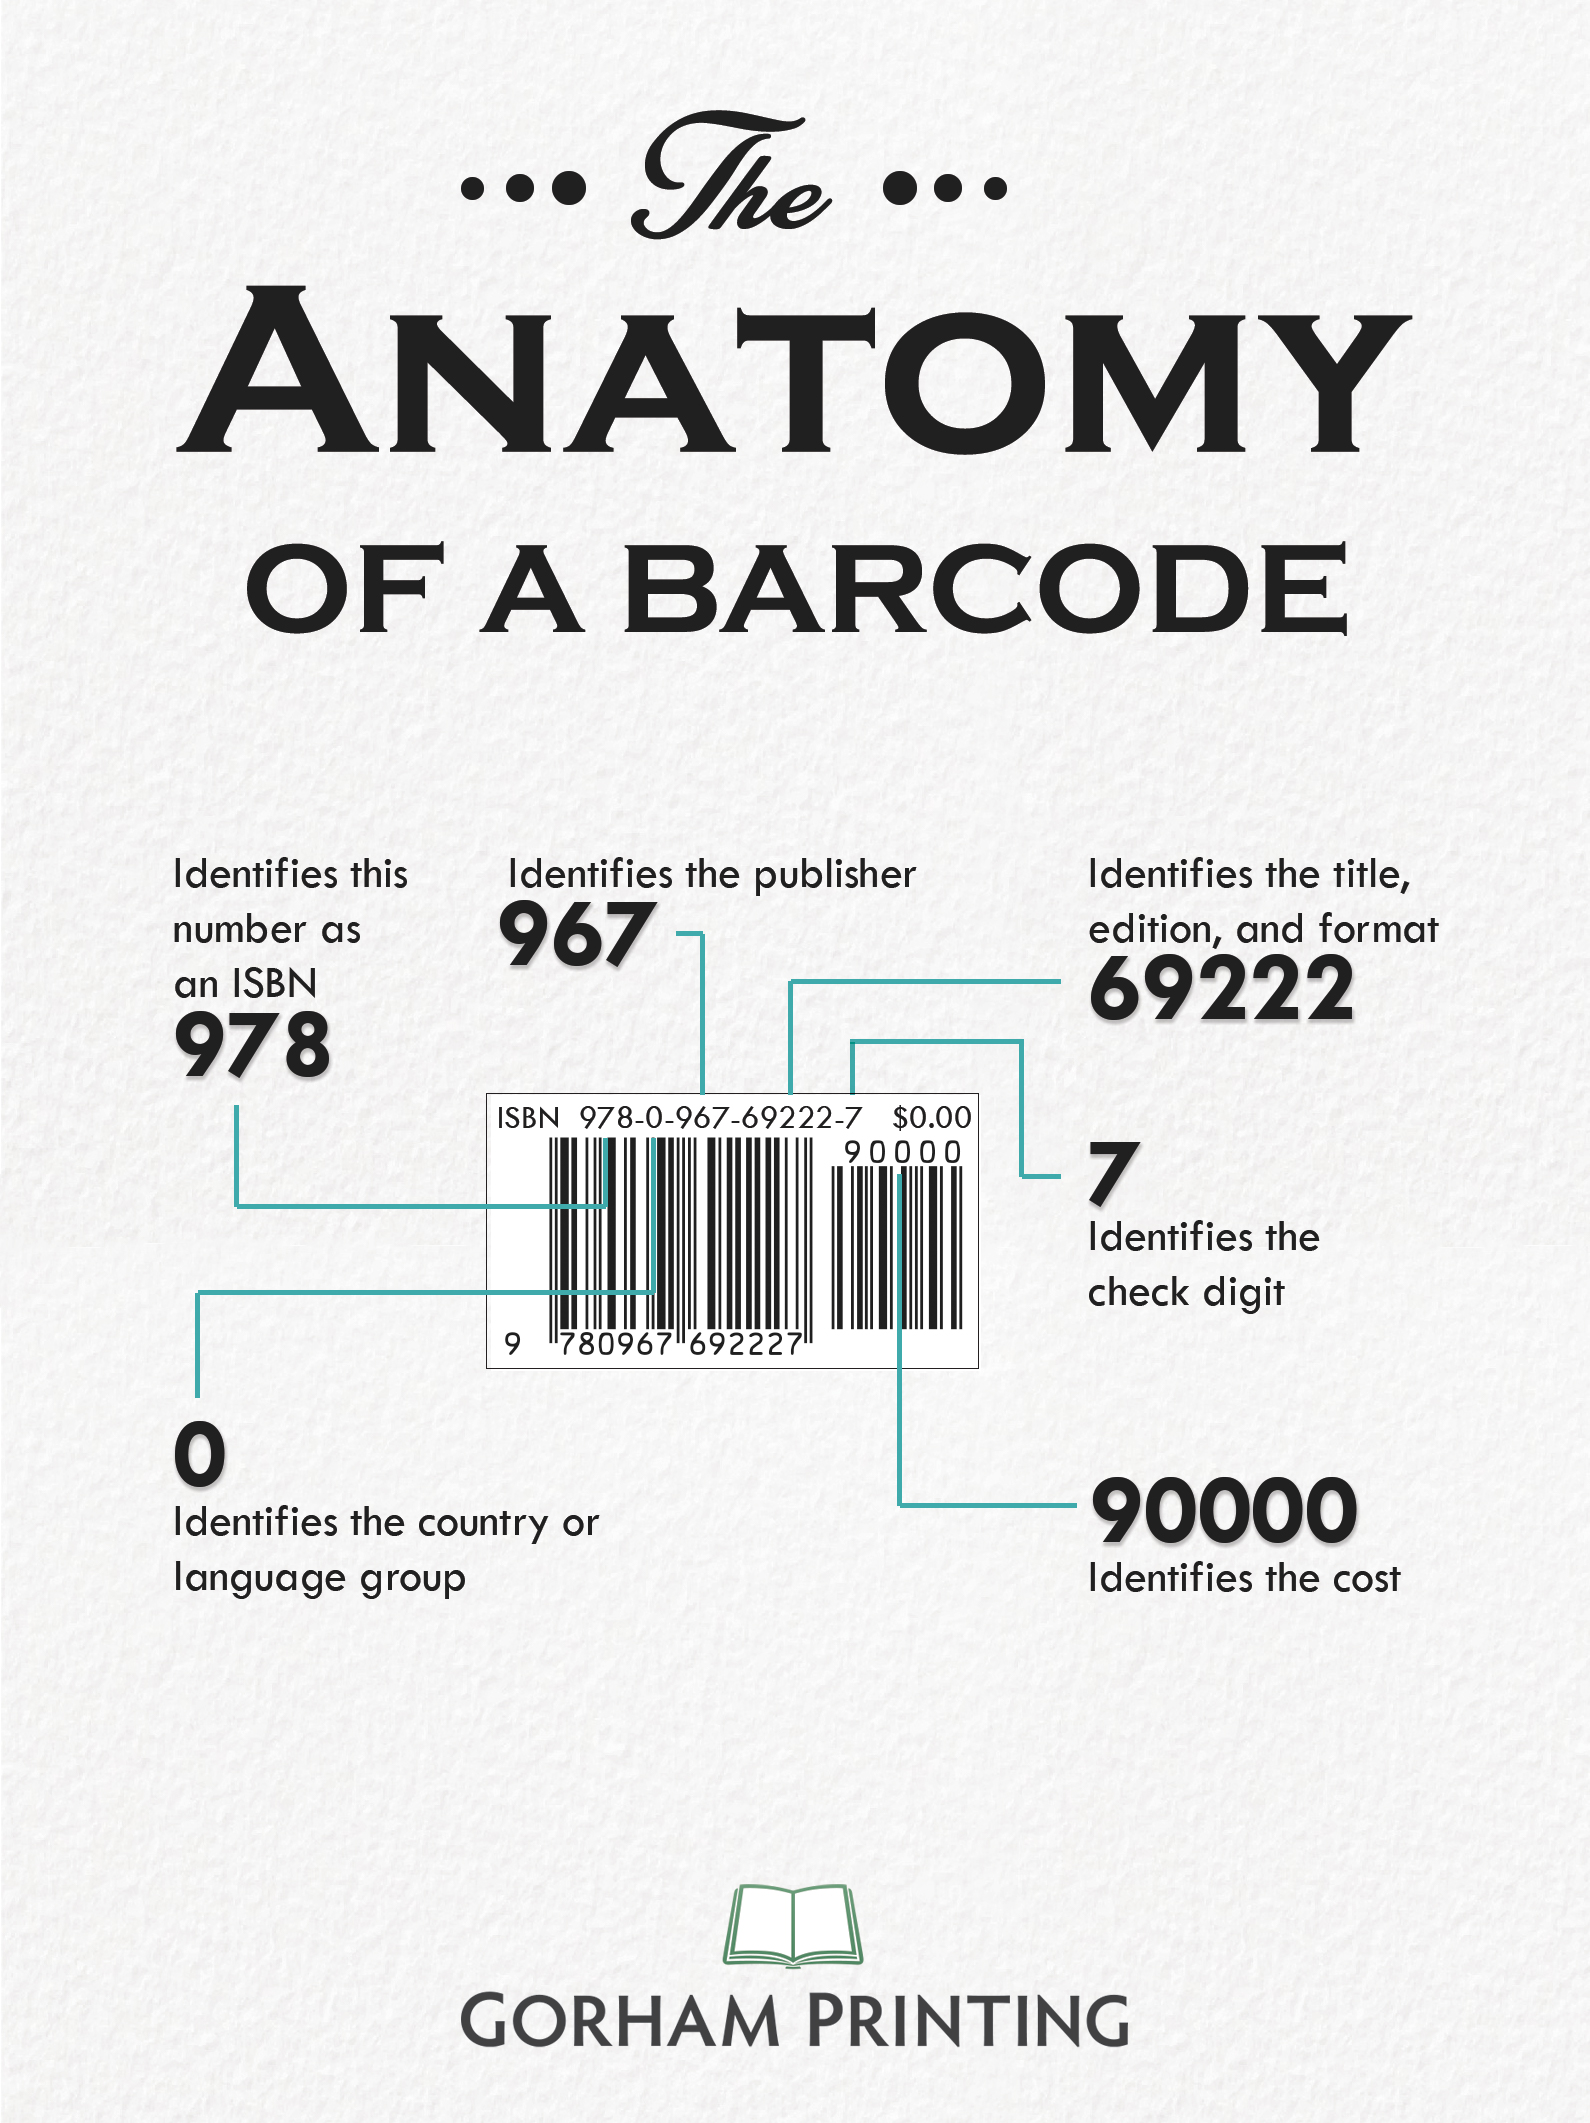 The Anatomy of a Barcode